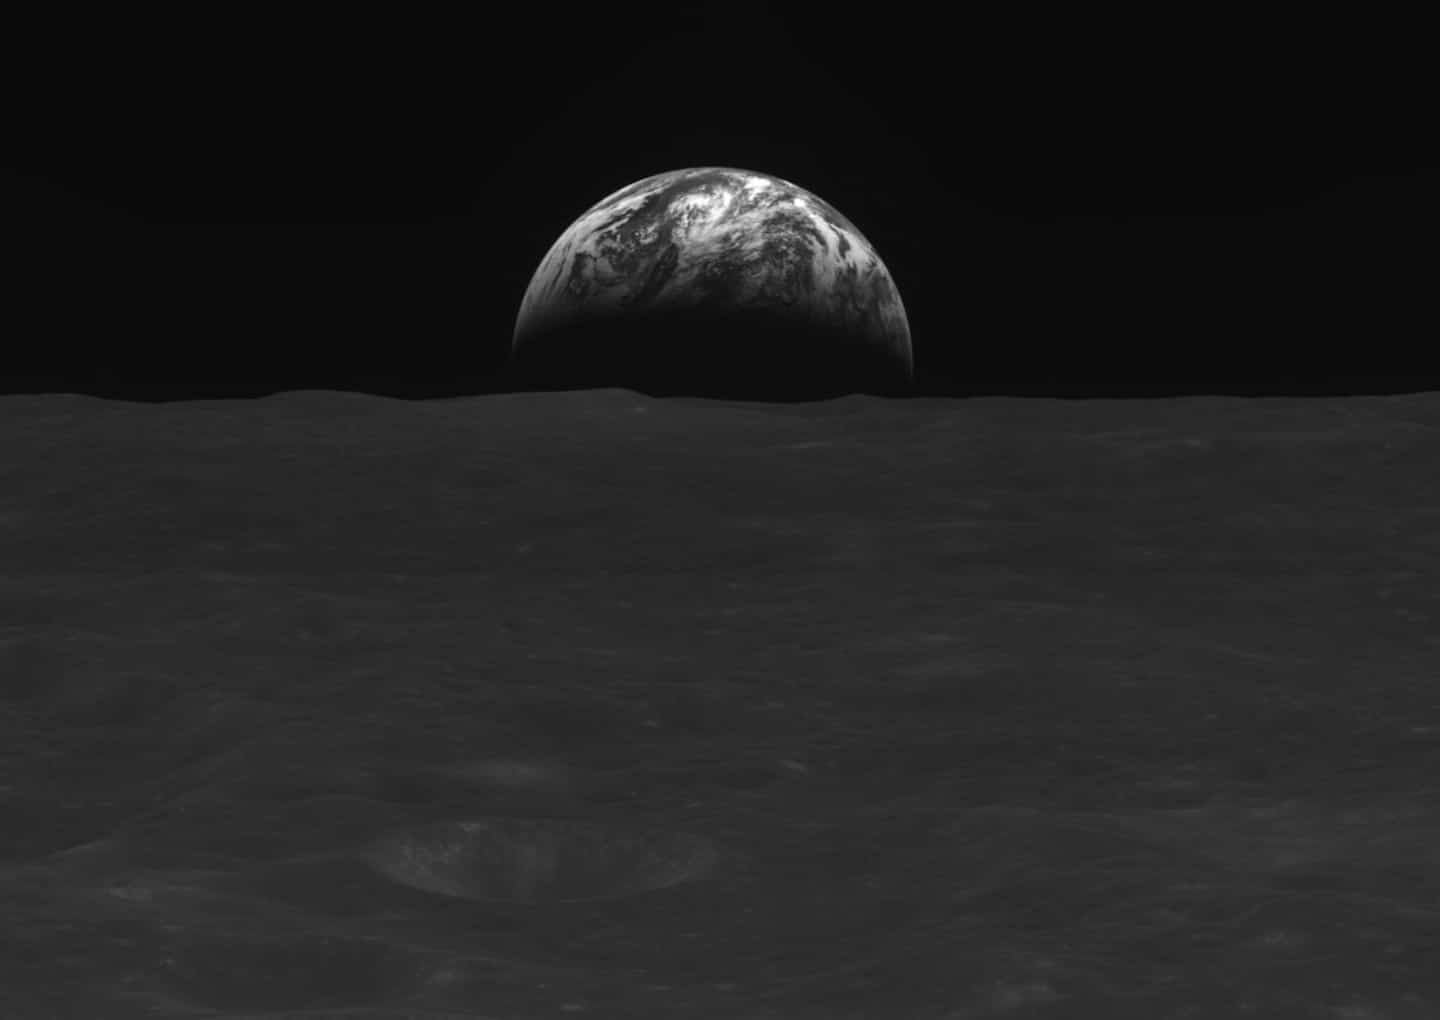 South Korea's first lunar probe transmits images of Earth and Moon